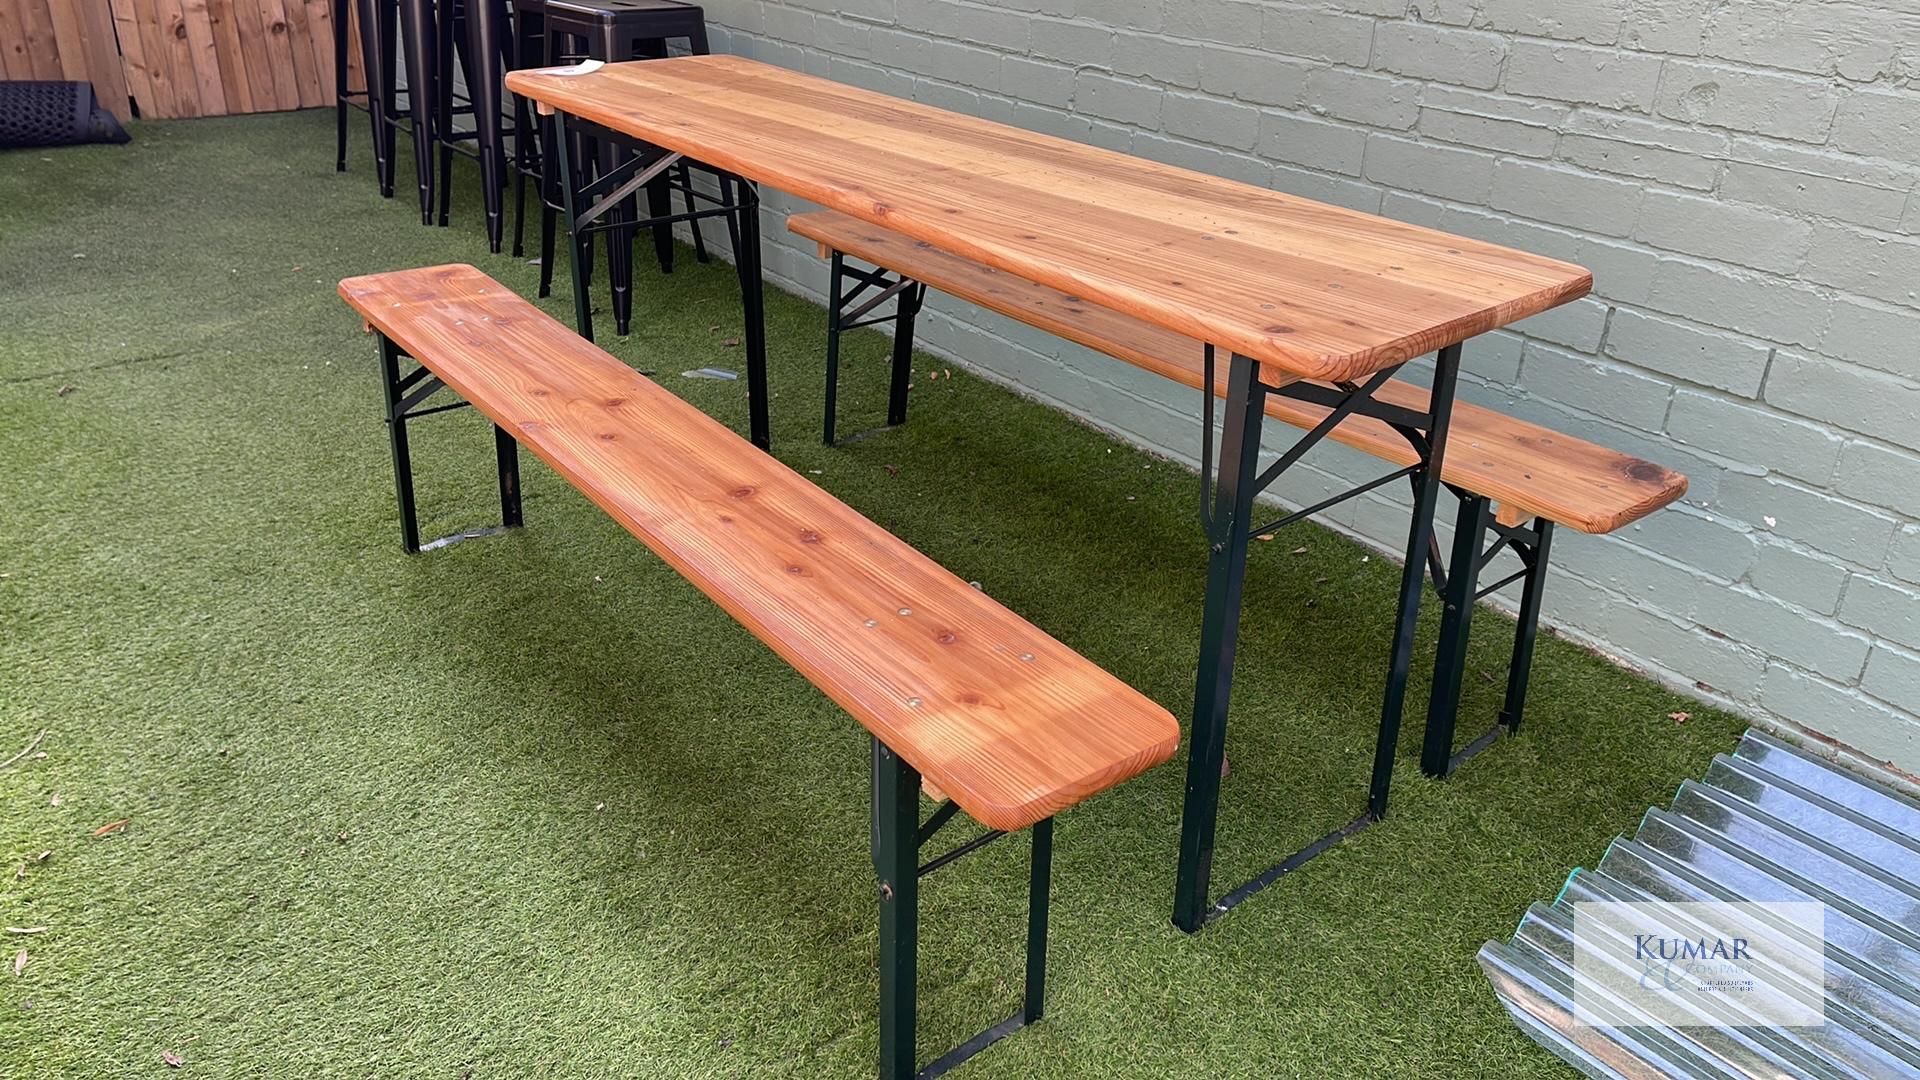 Wooden Top Metal Framed Outdoor Table with 2: Matching Benches - Dimensions Table L - 1780mm x W - - Image 4 of 6